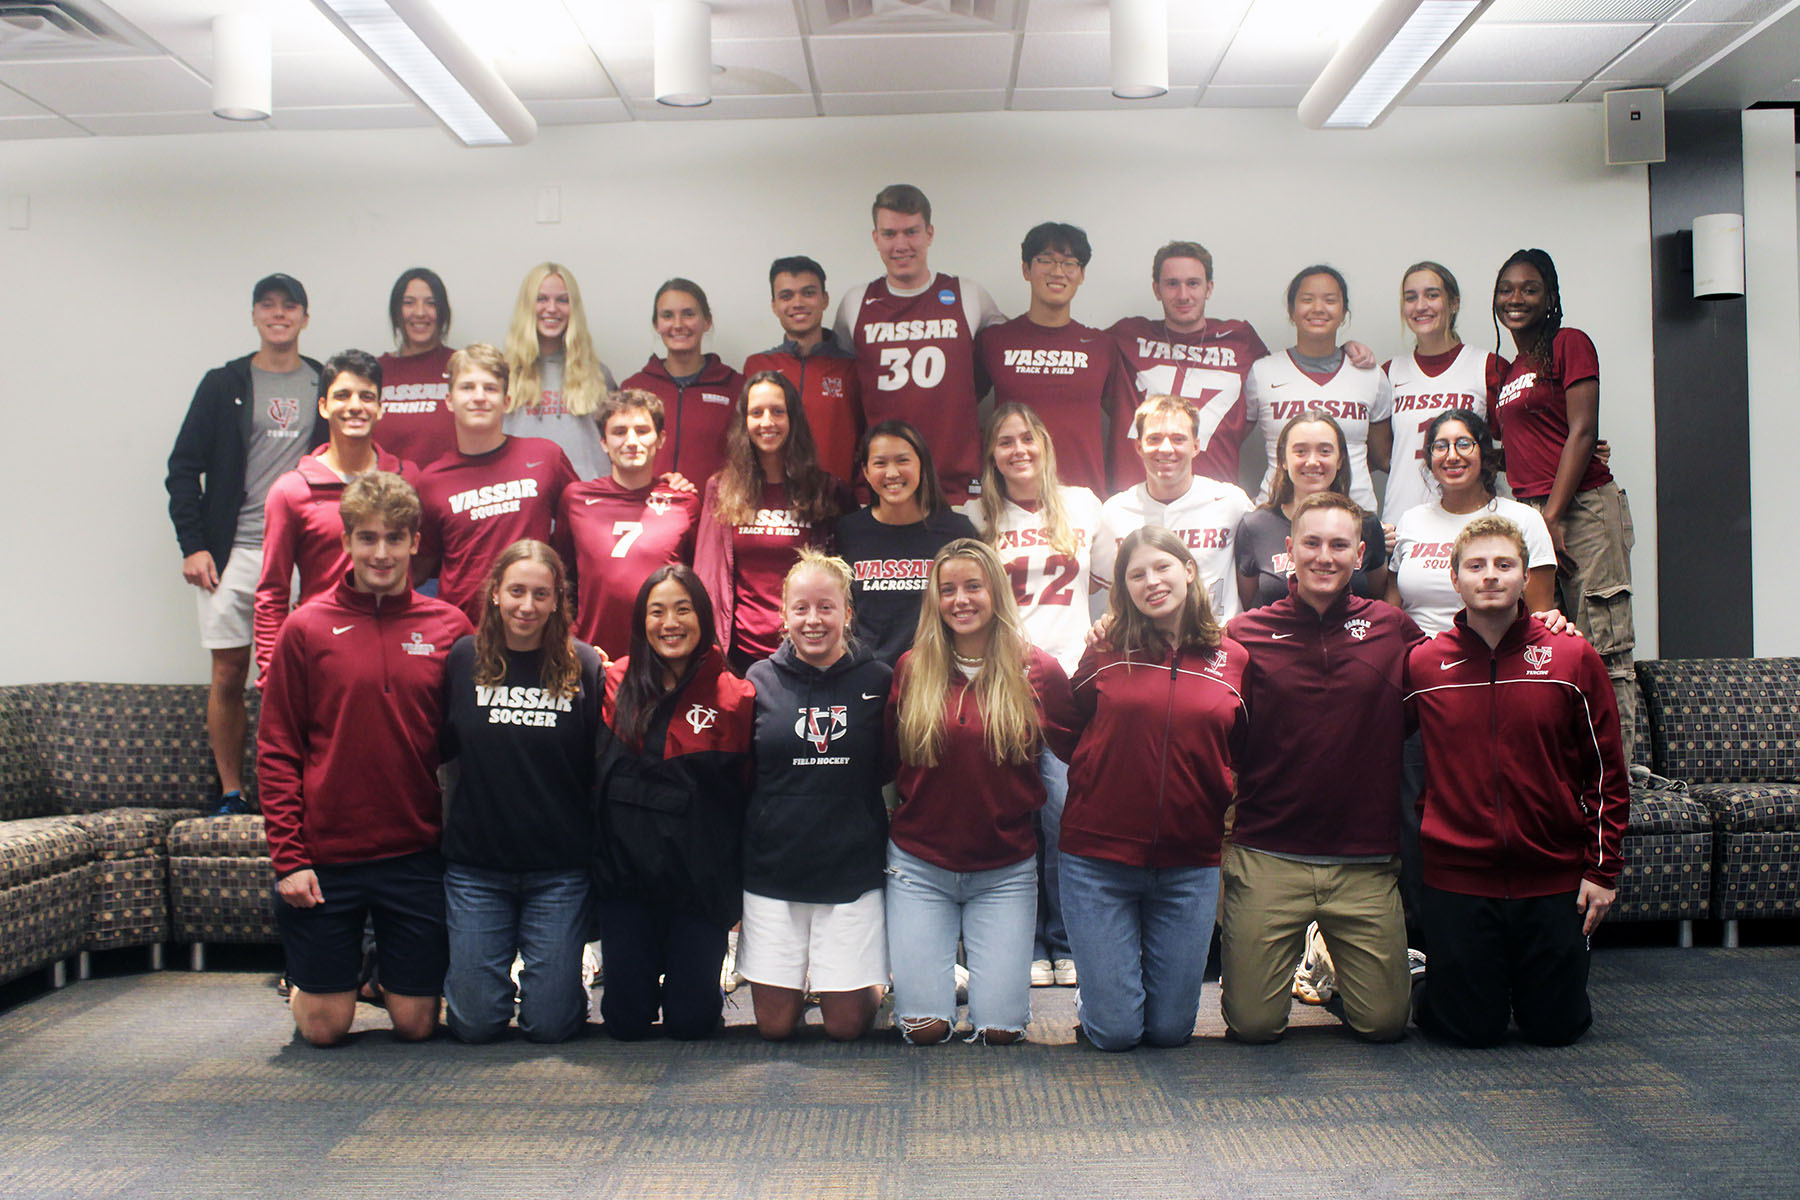 Group photo of the Student Athlete Advisory Committee wearing Vassar shirts and jackets kneeling and standing in front and on a couch. 